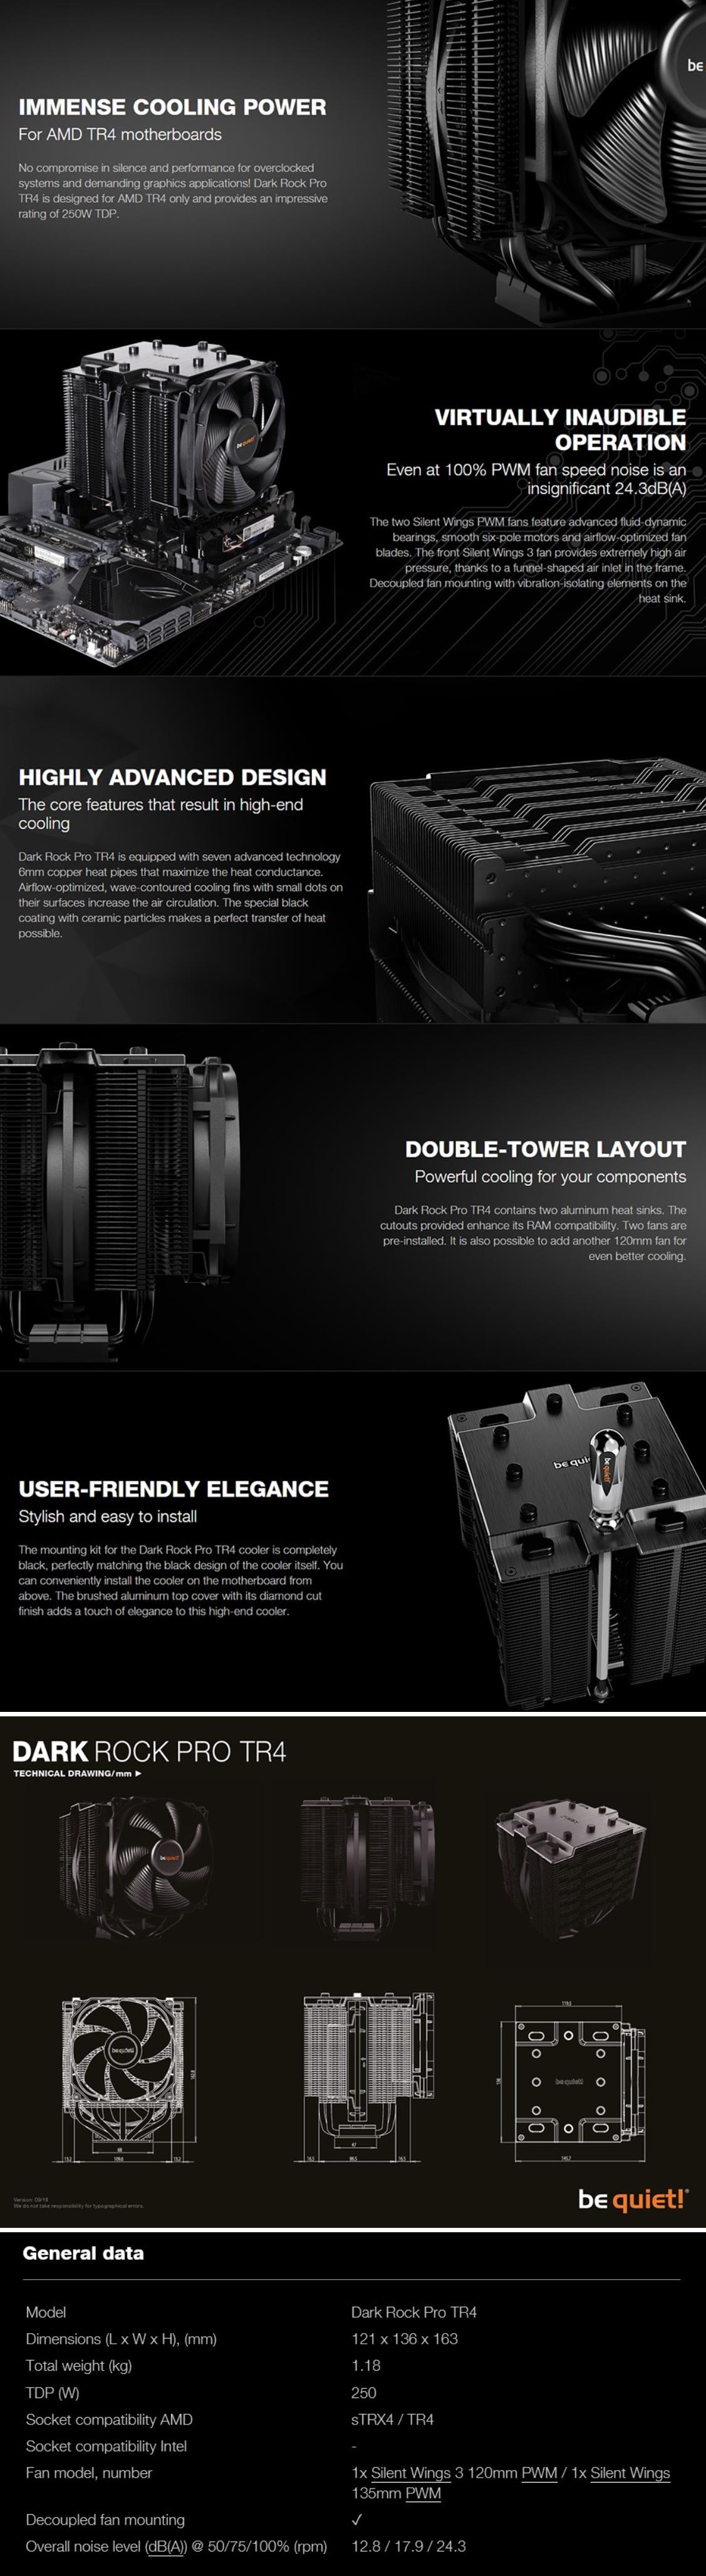 A large marketing image providing additional information about the product be quiet! Dark Rock Pro TR4 CPU Cooler - Additional alt info not provided